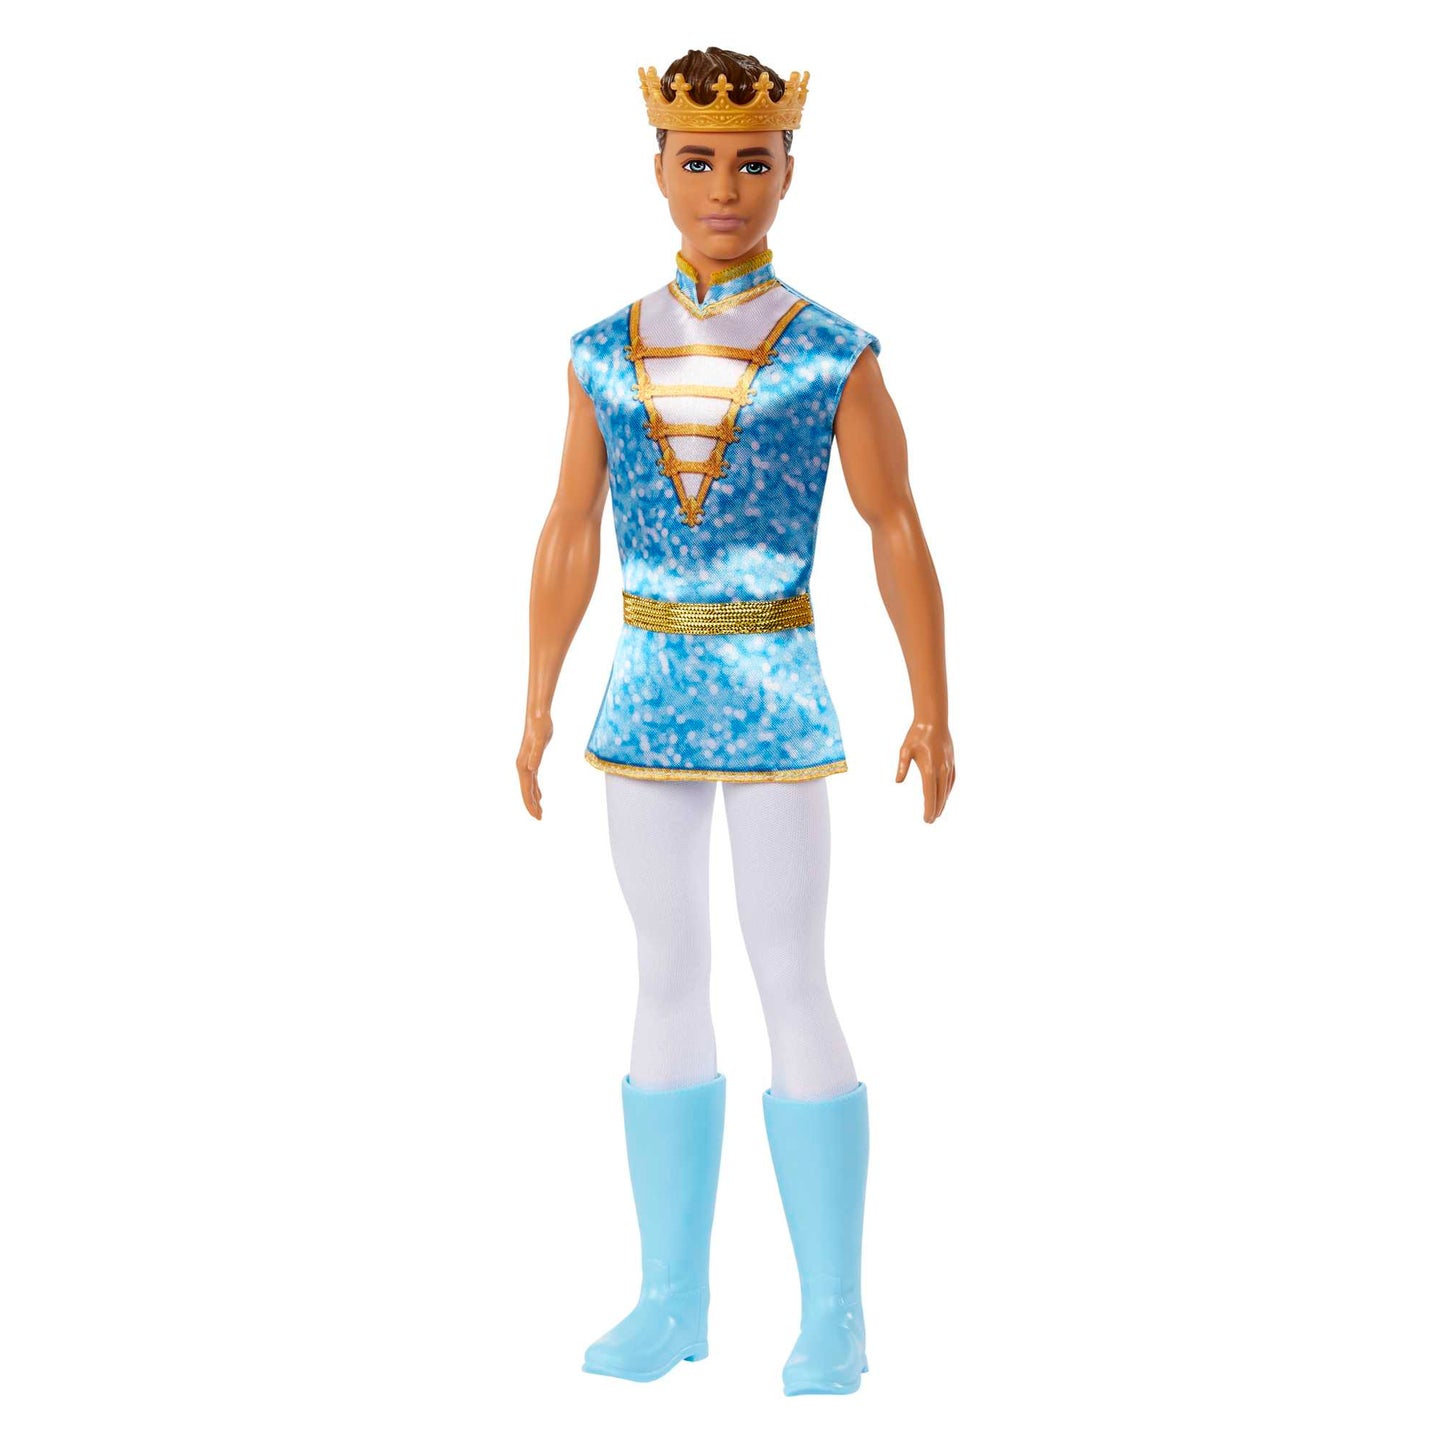 Barbie Doll Royal Ken with Crown - Assorted*